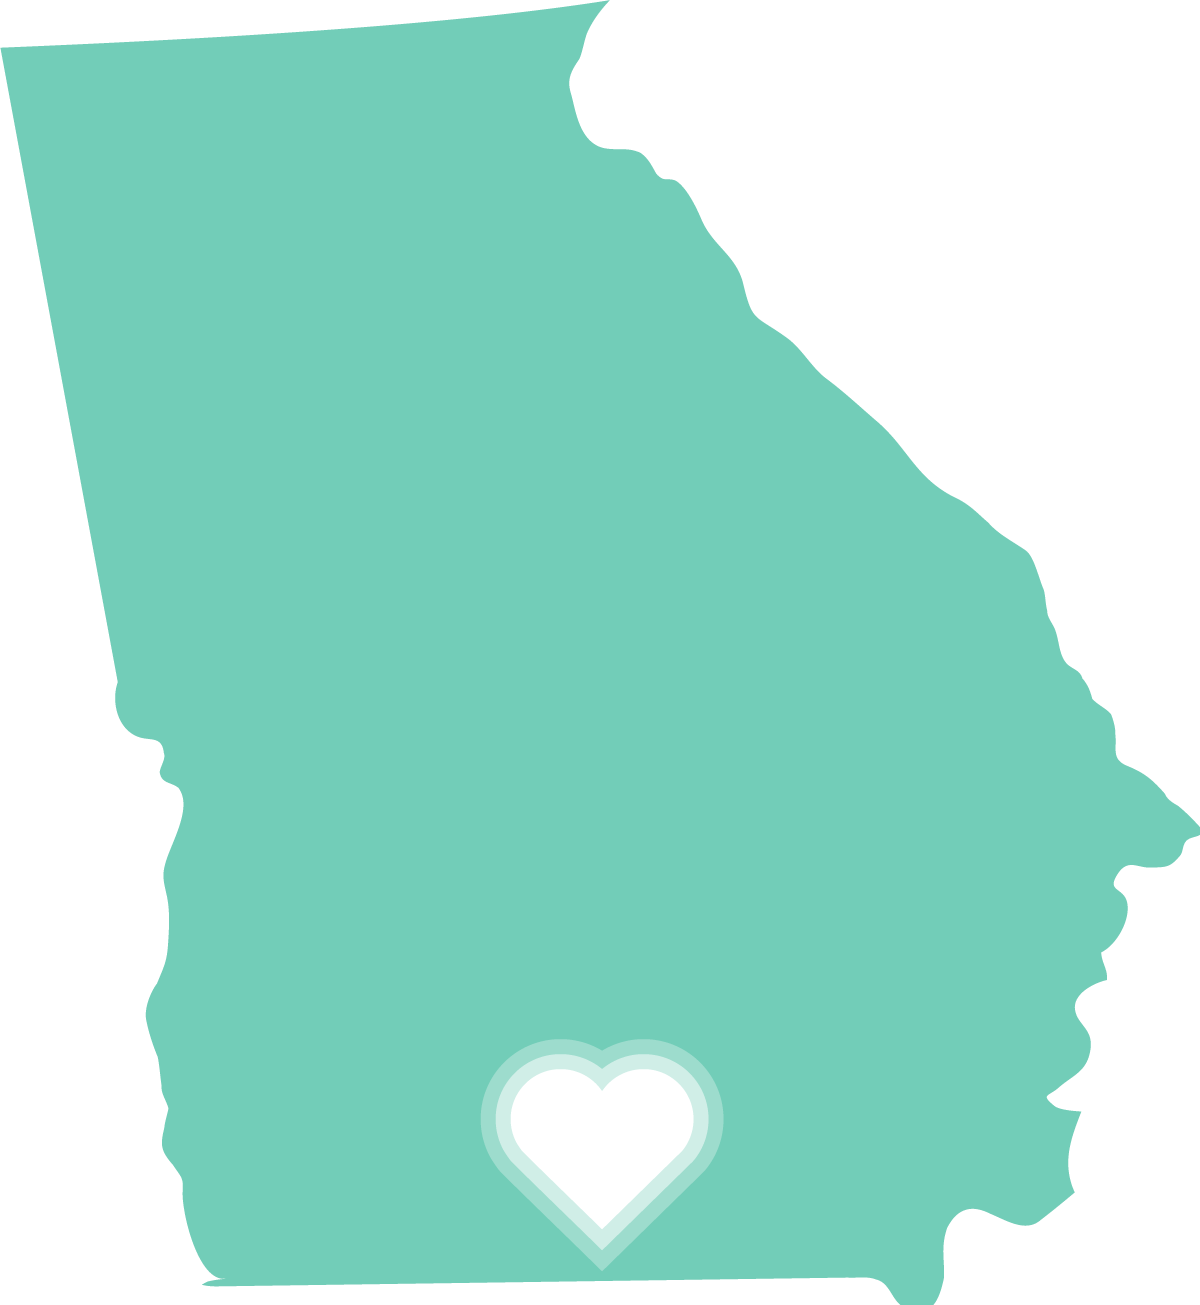 Silhouette of Georgia with a heart